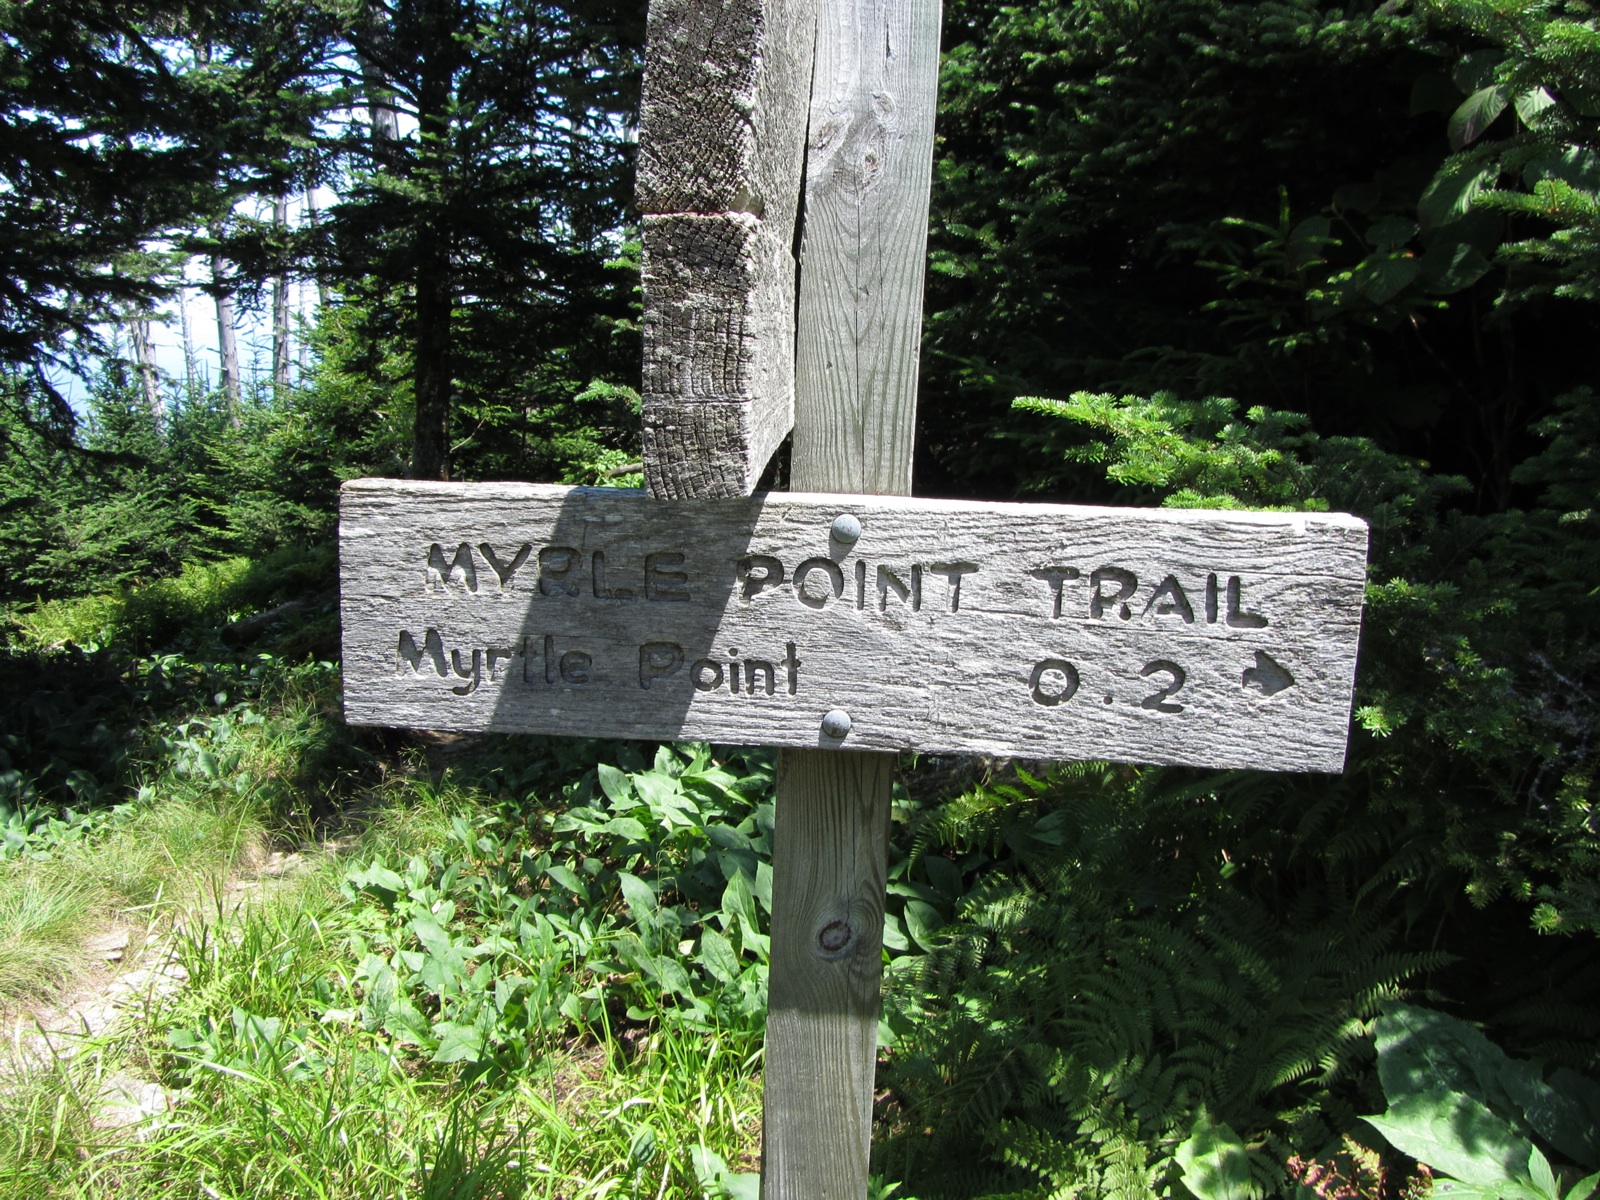 Myrle Point Trail Sign - Saturday